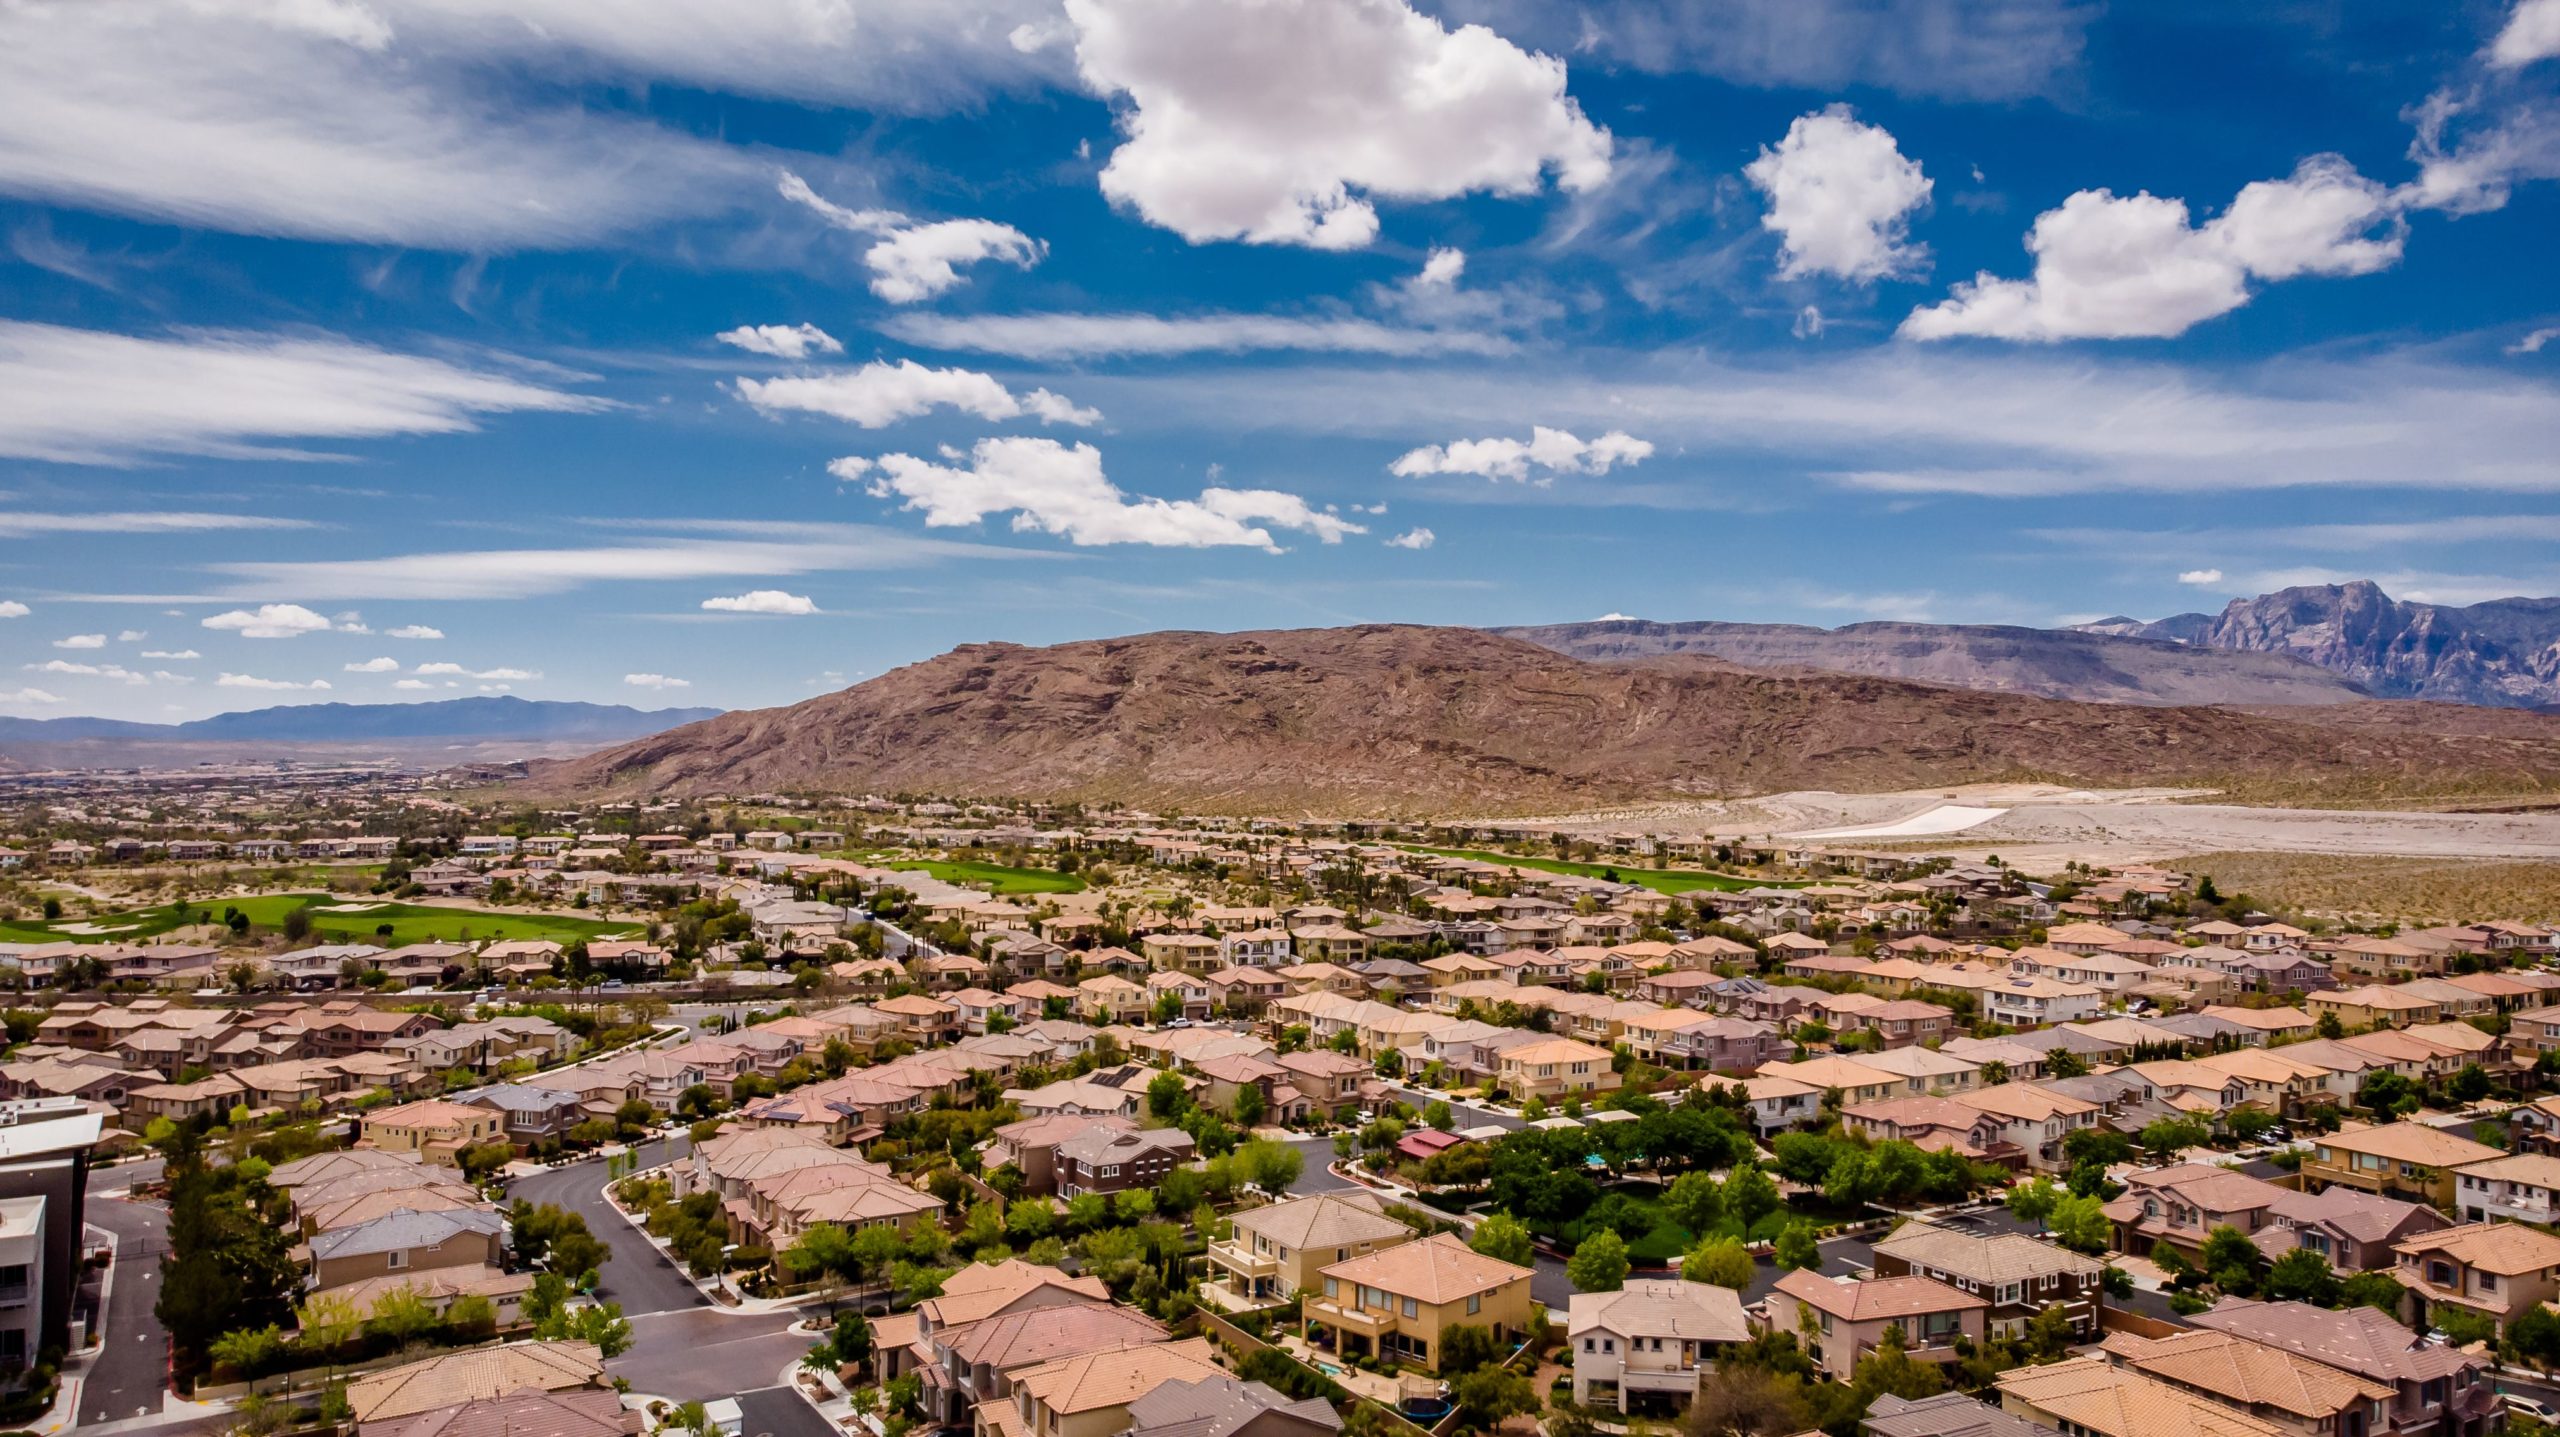 Summerlin Marking Its 30th Anniversary This Year Summerlin